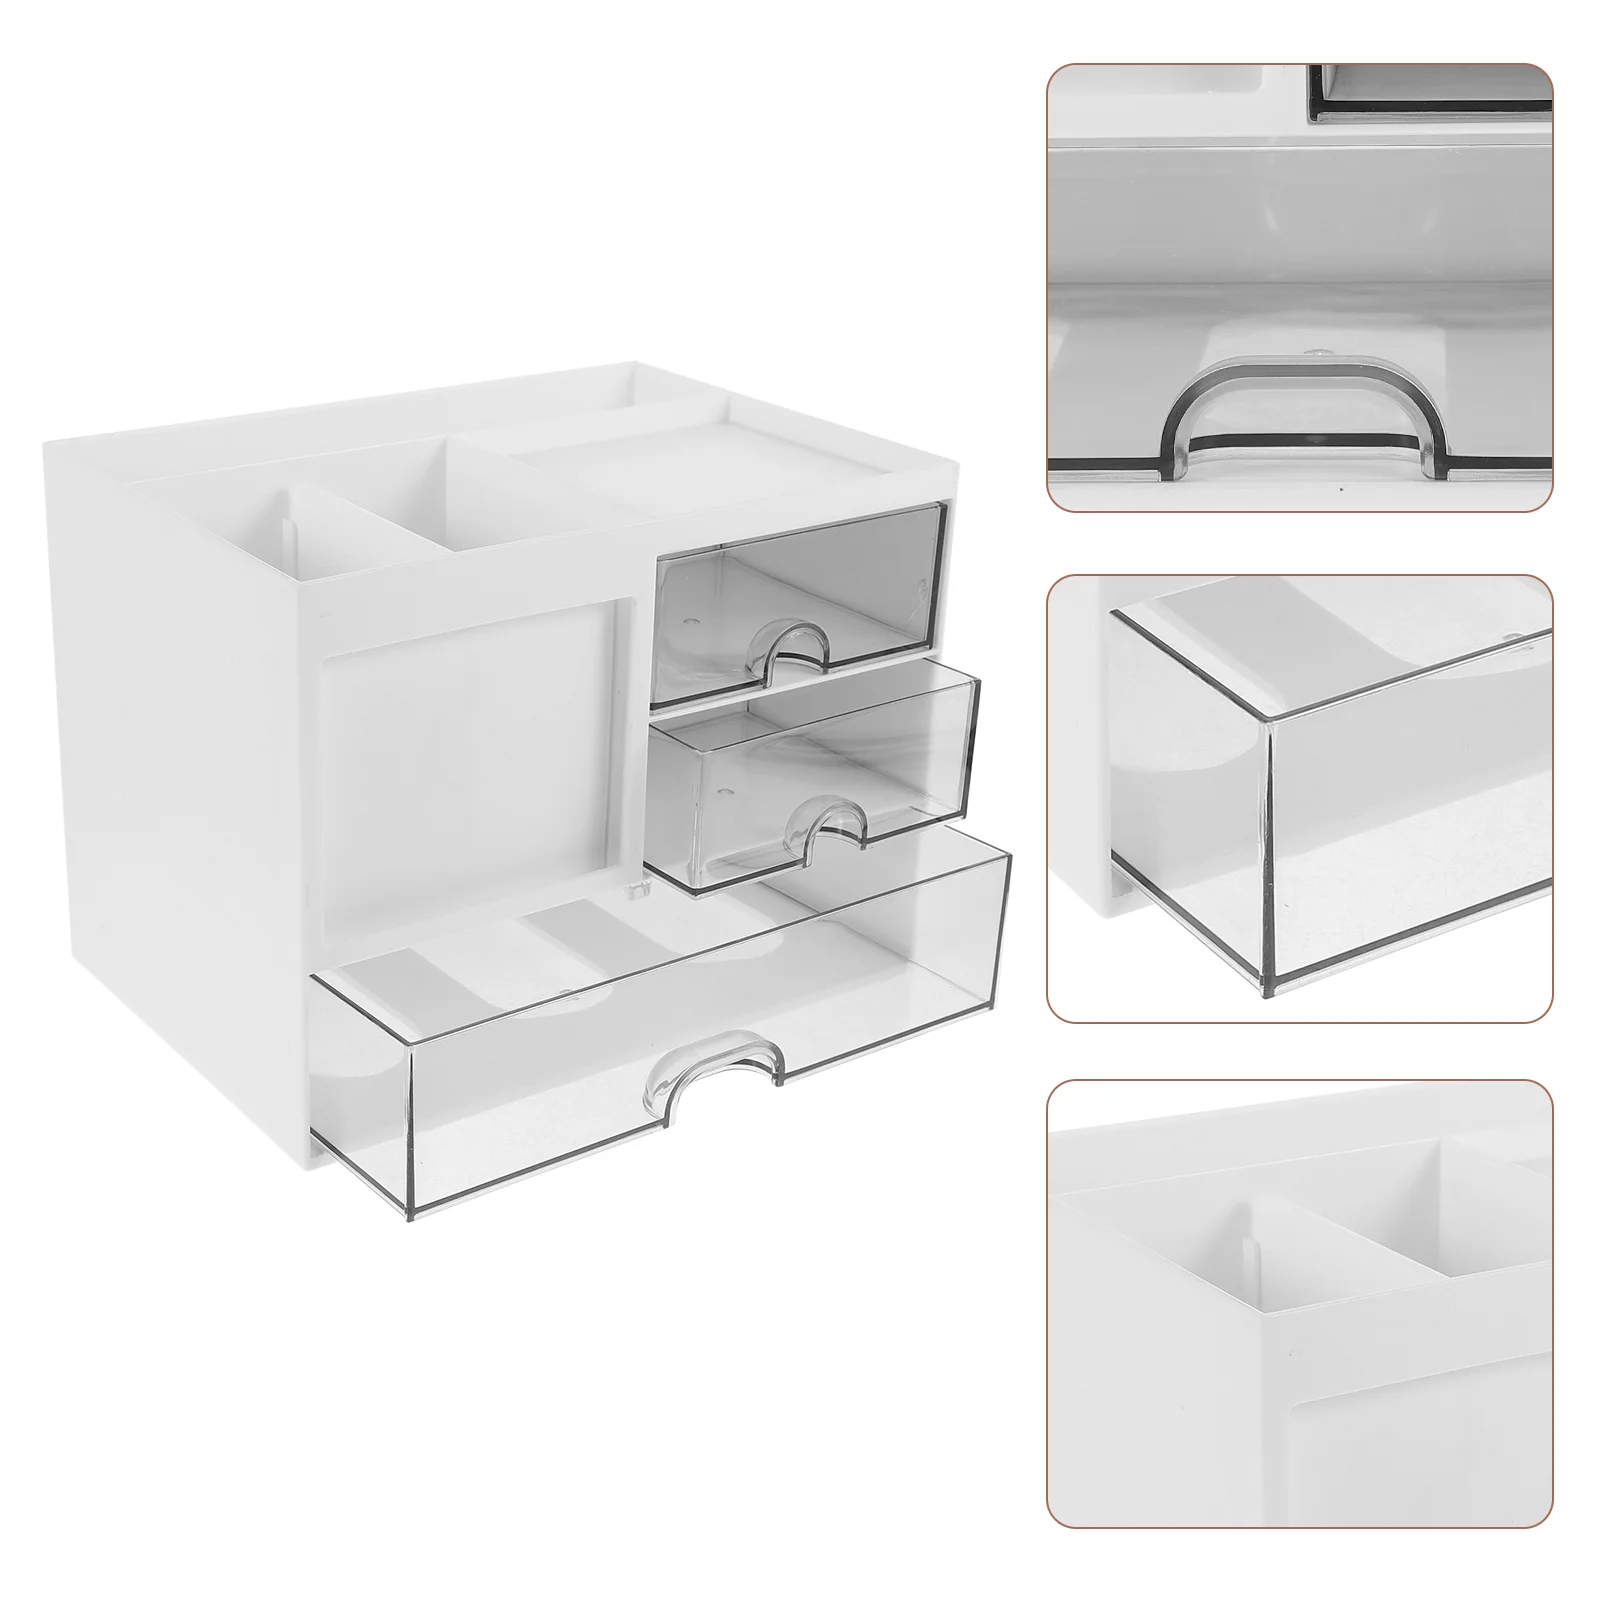 

File Cabinets Desktop Storage Box Office Drawer The Hips Small Organizer with Drawers